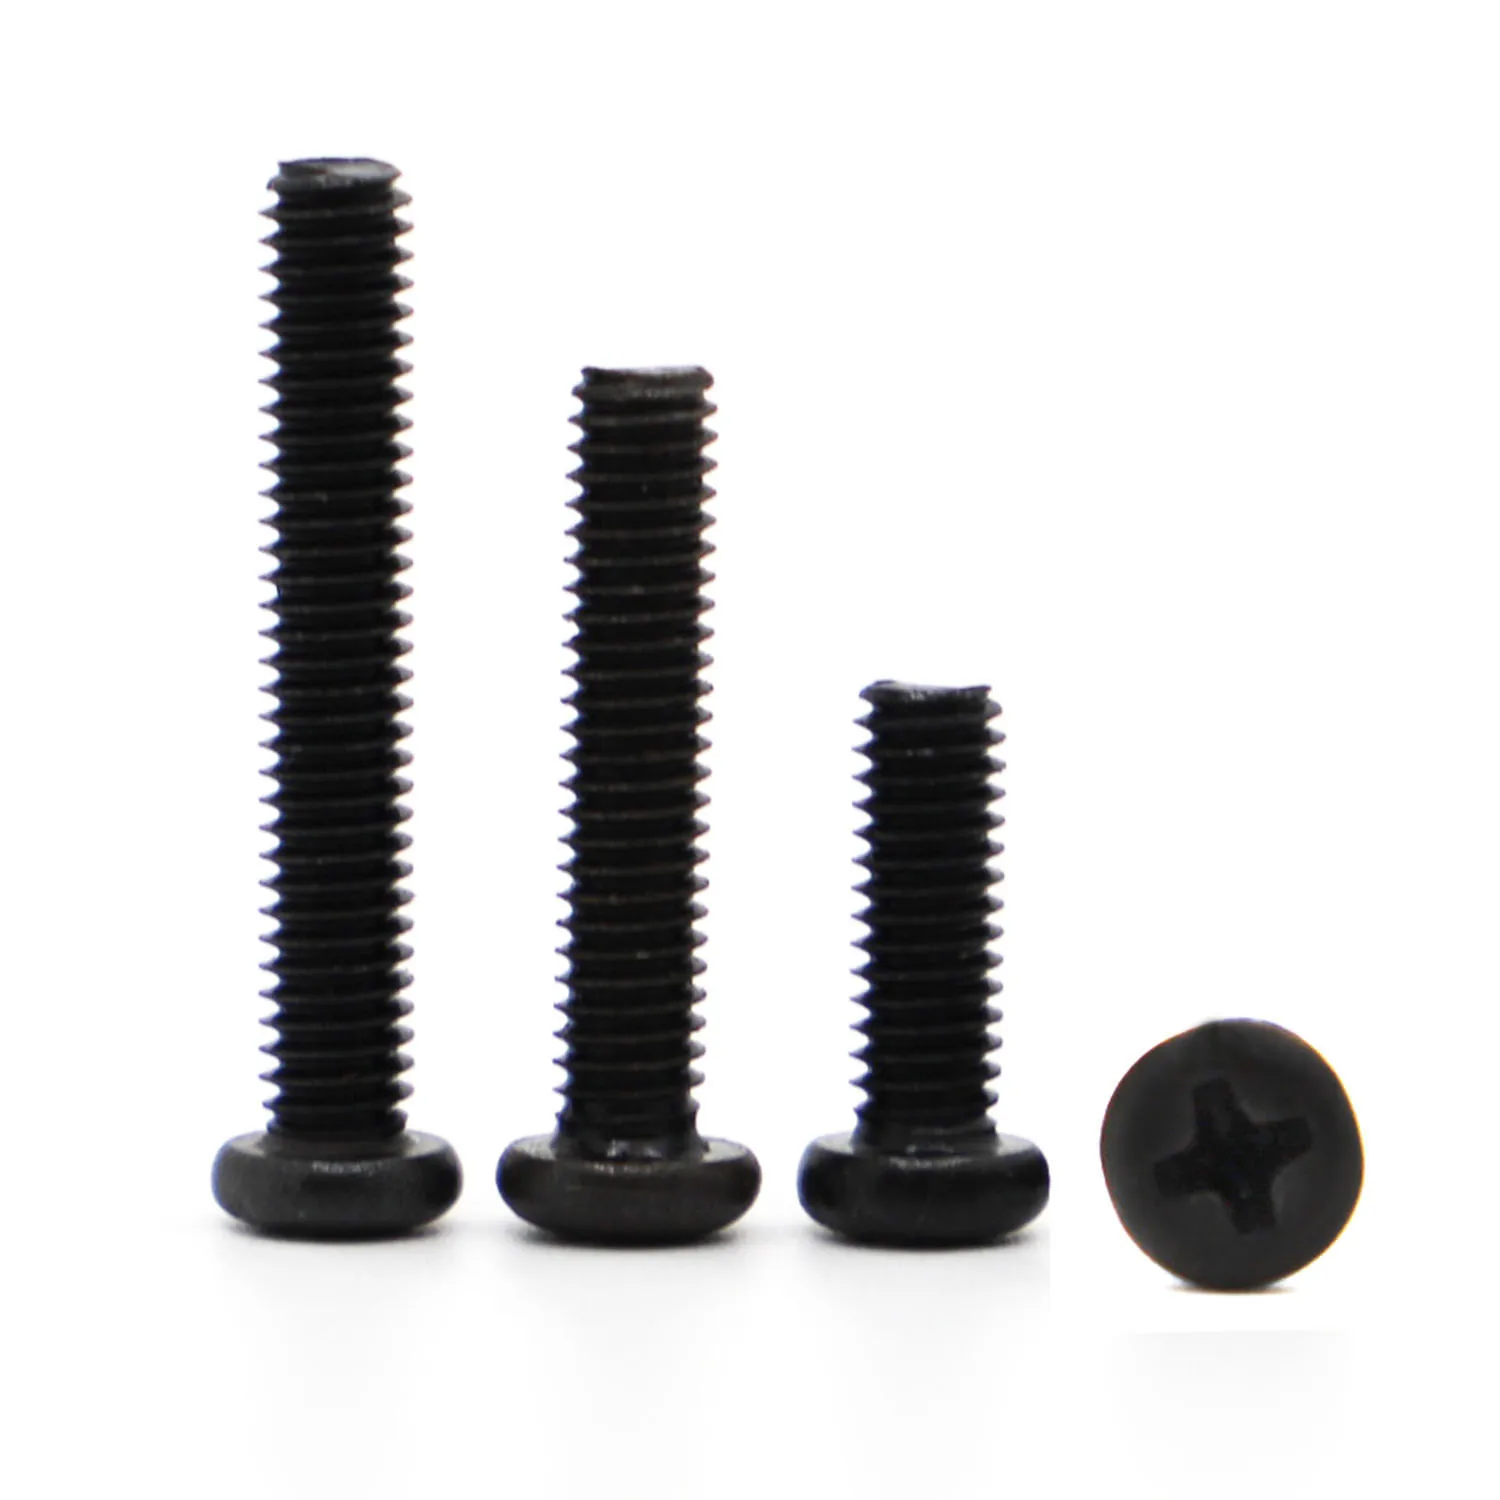 

GB818 DIN7985 Black Cross Pan Head Screw M1.2 M1.4 M1.7 M2 M2.5 M3 M4 Electronic Small Size Recessed Round Head Phillips Screws